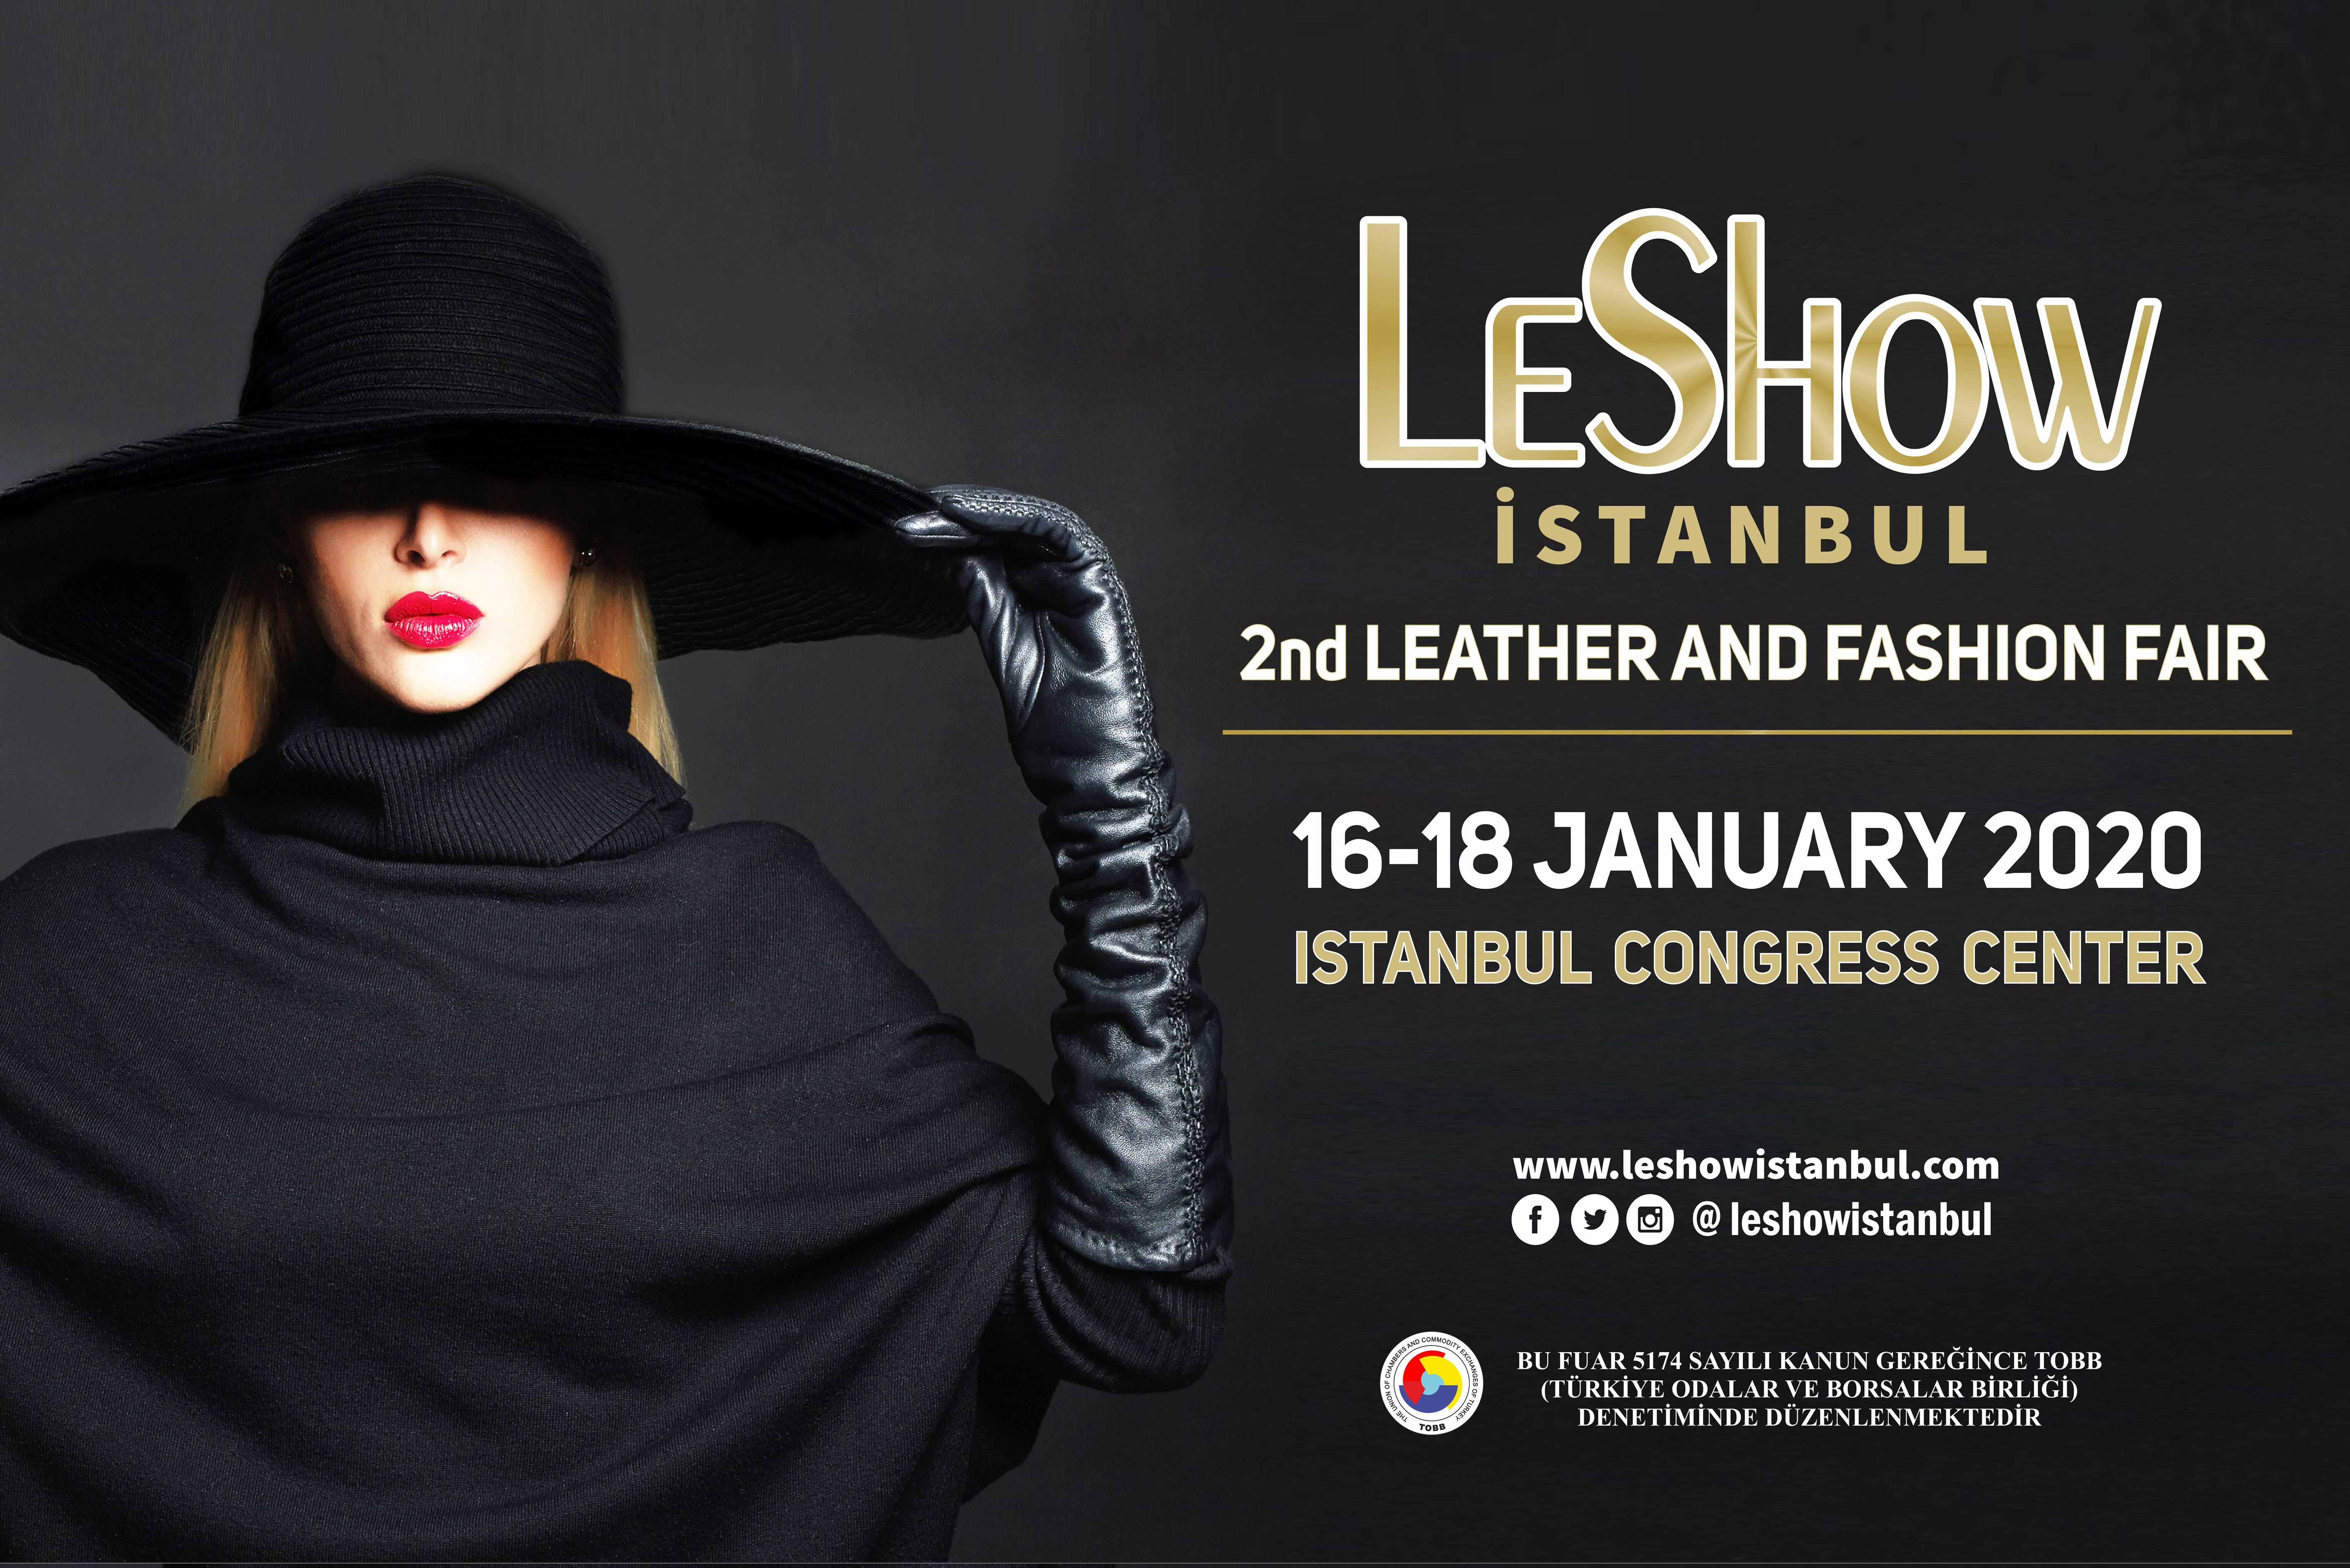 LeShow Istanbul 2nd Leather and Fashion